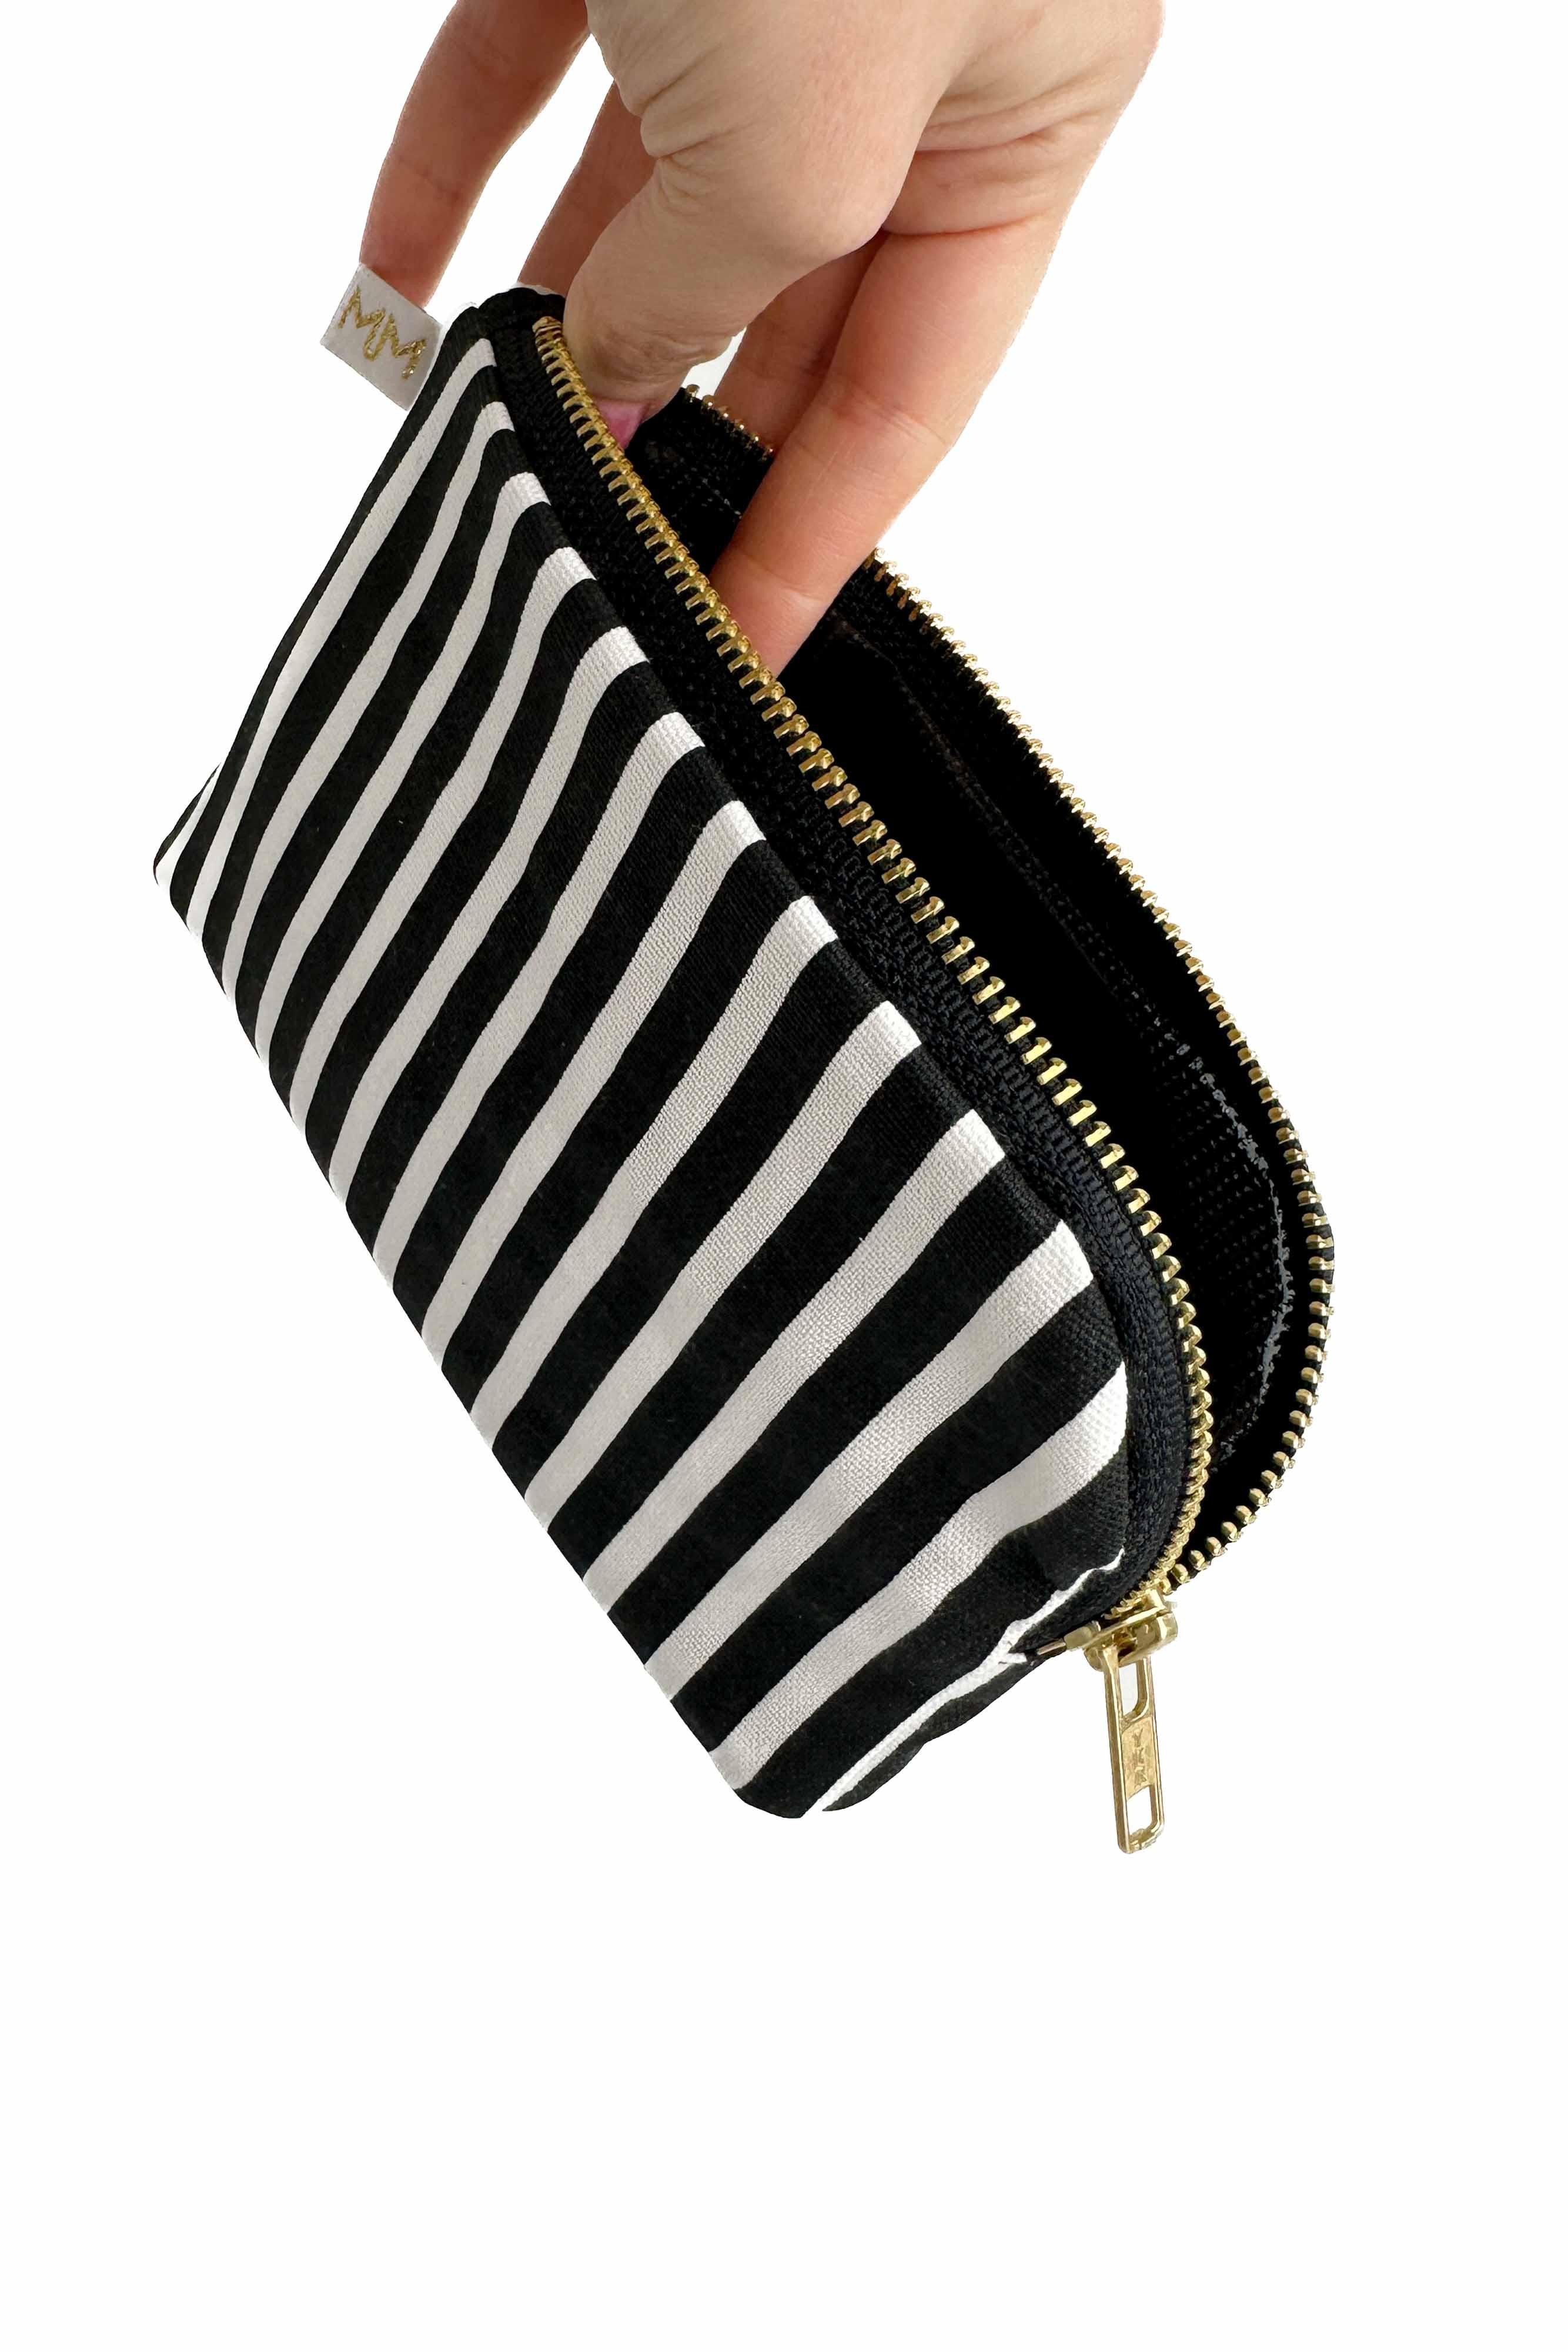 Canvas Stripe Vertical Everyday Travel Bag READY TO SHIP - Modern Makerie